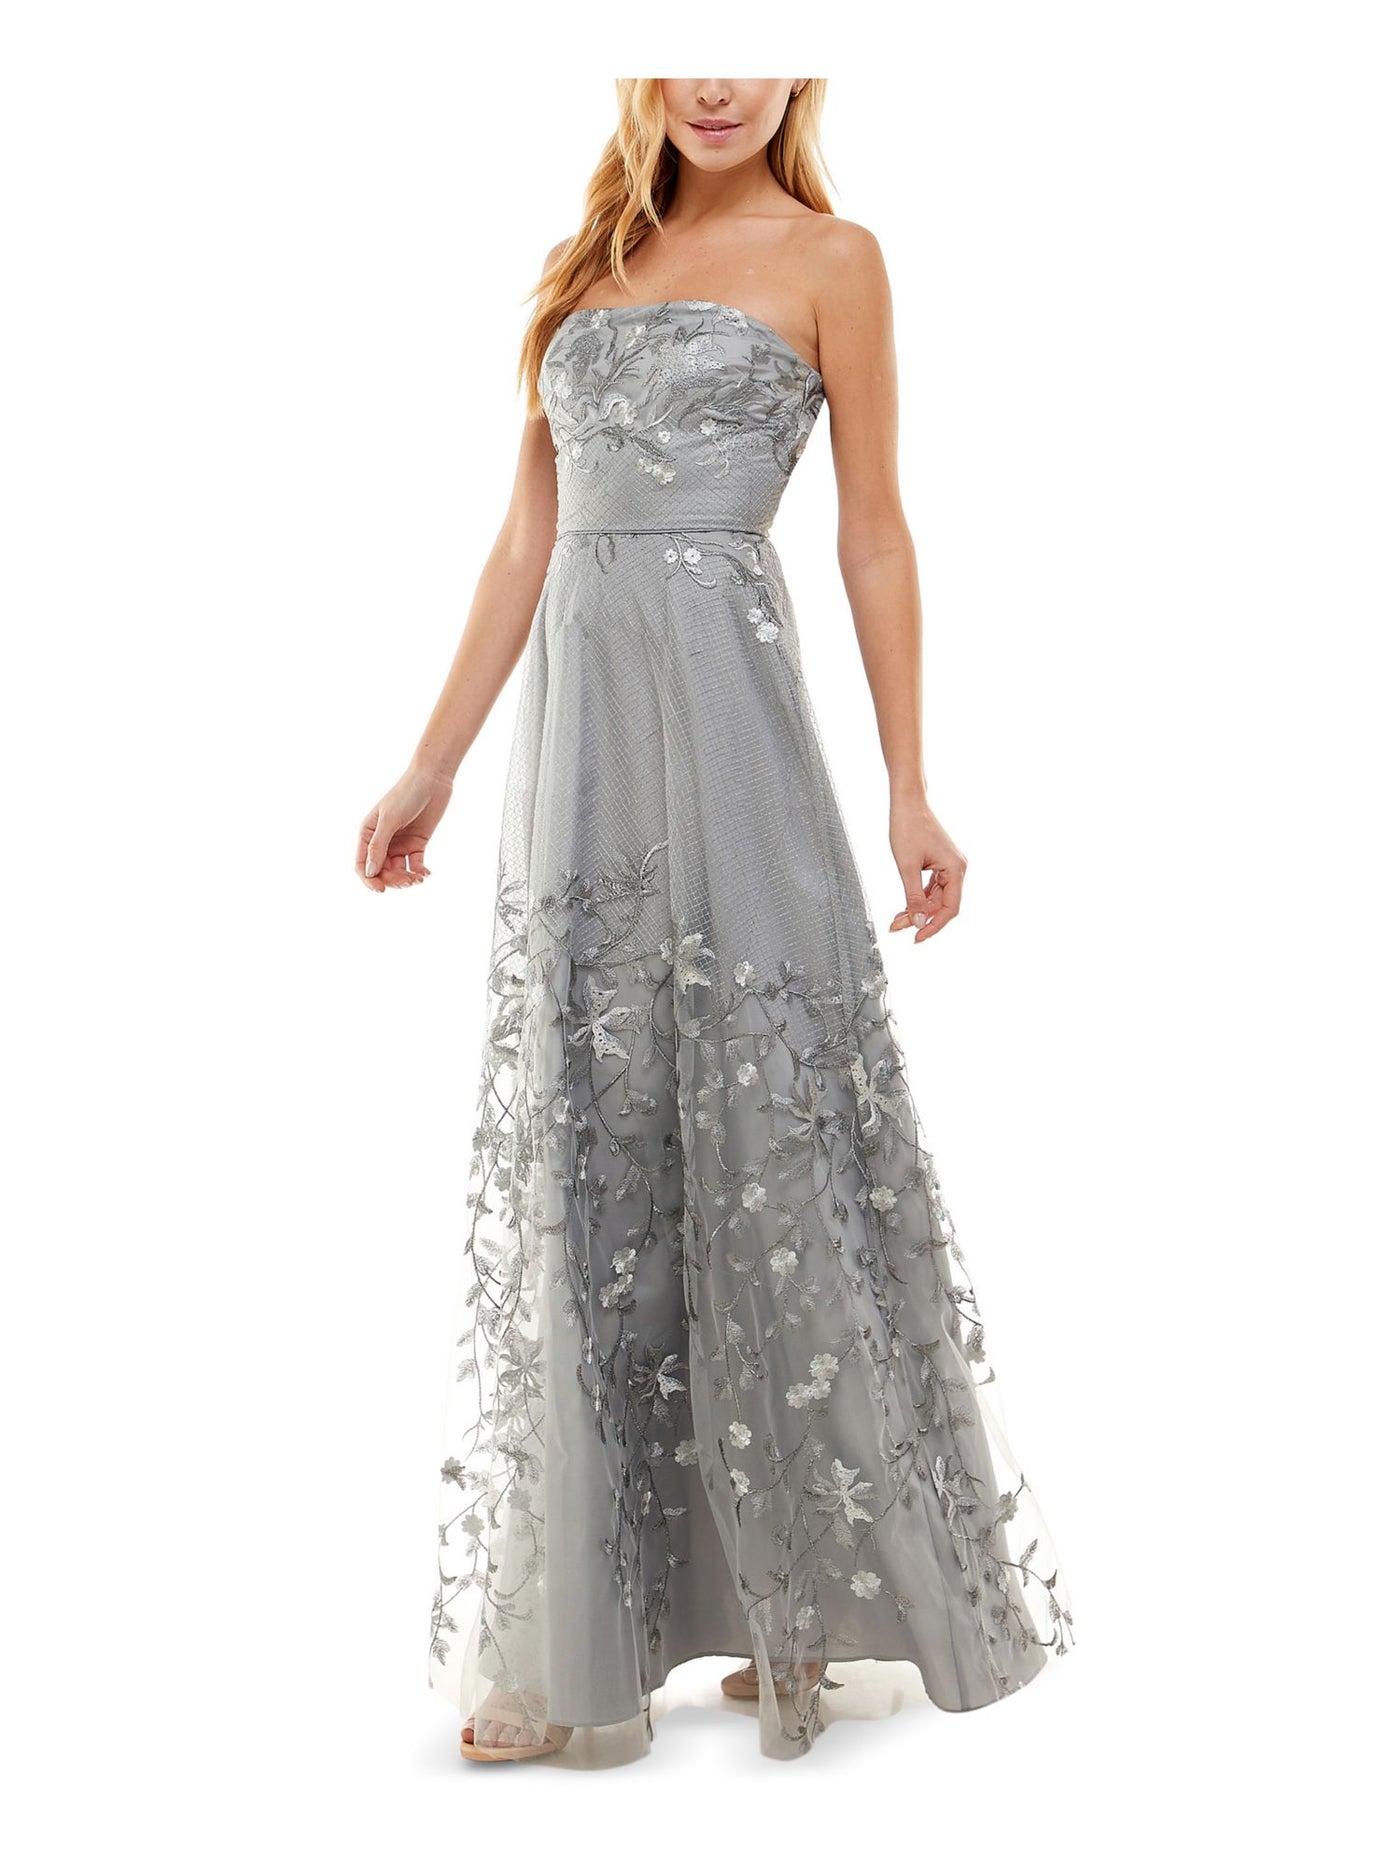 CITY STUDIO Womens Gray Embroidered Lace Zippered Sleeveless Strapless Full-Length  Gown Prom Dress Juniors 0